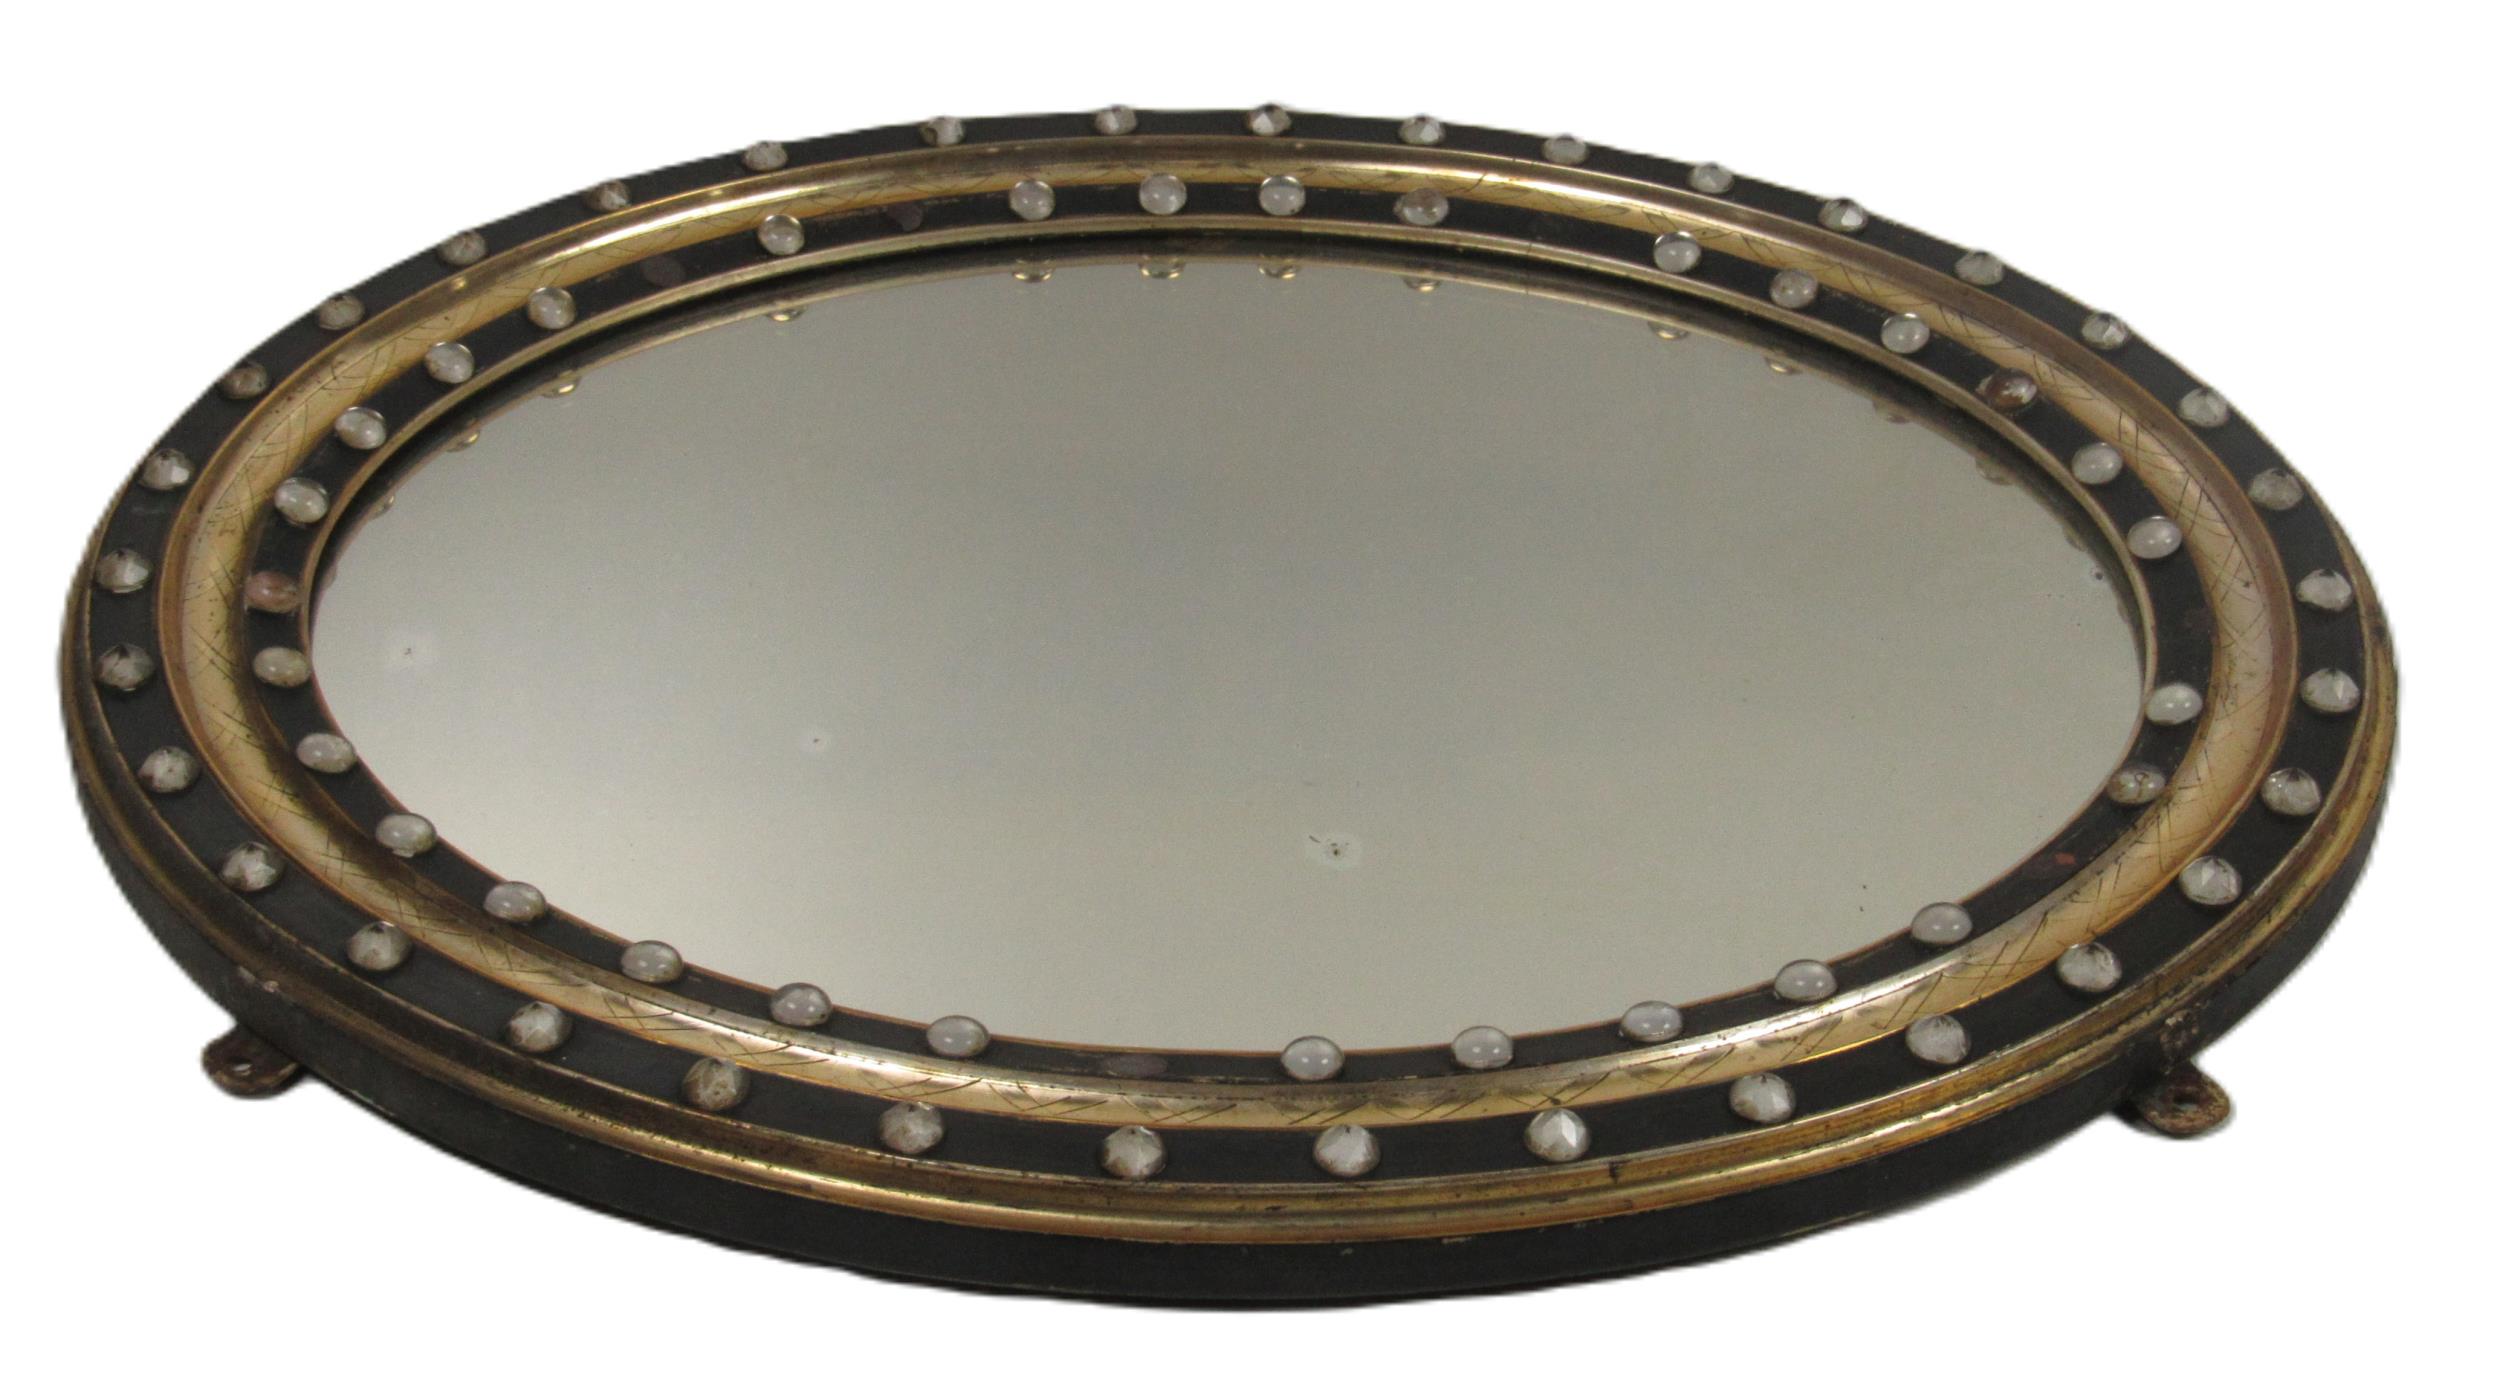 An attractive 19th Century Irish giltwood and ebonised oval Mirror, with silver faceted cut glass